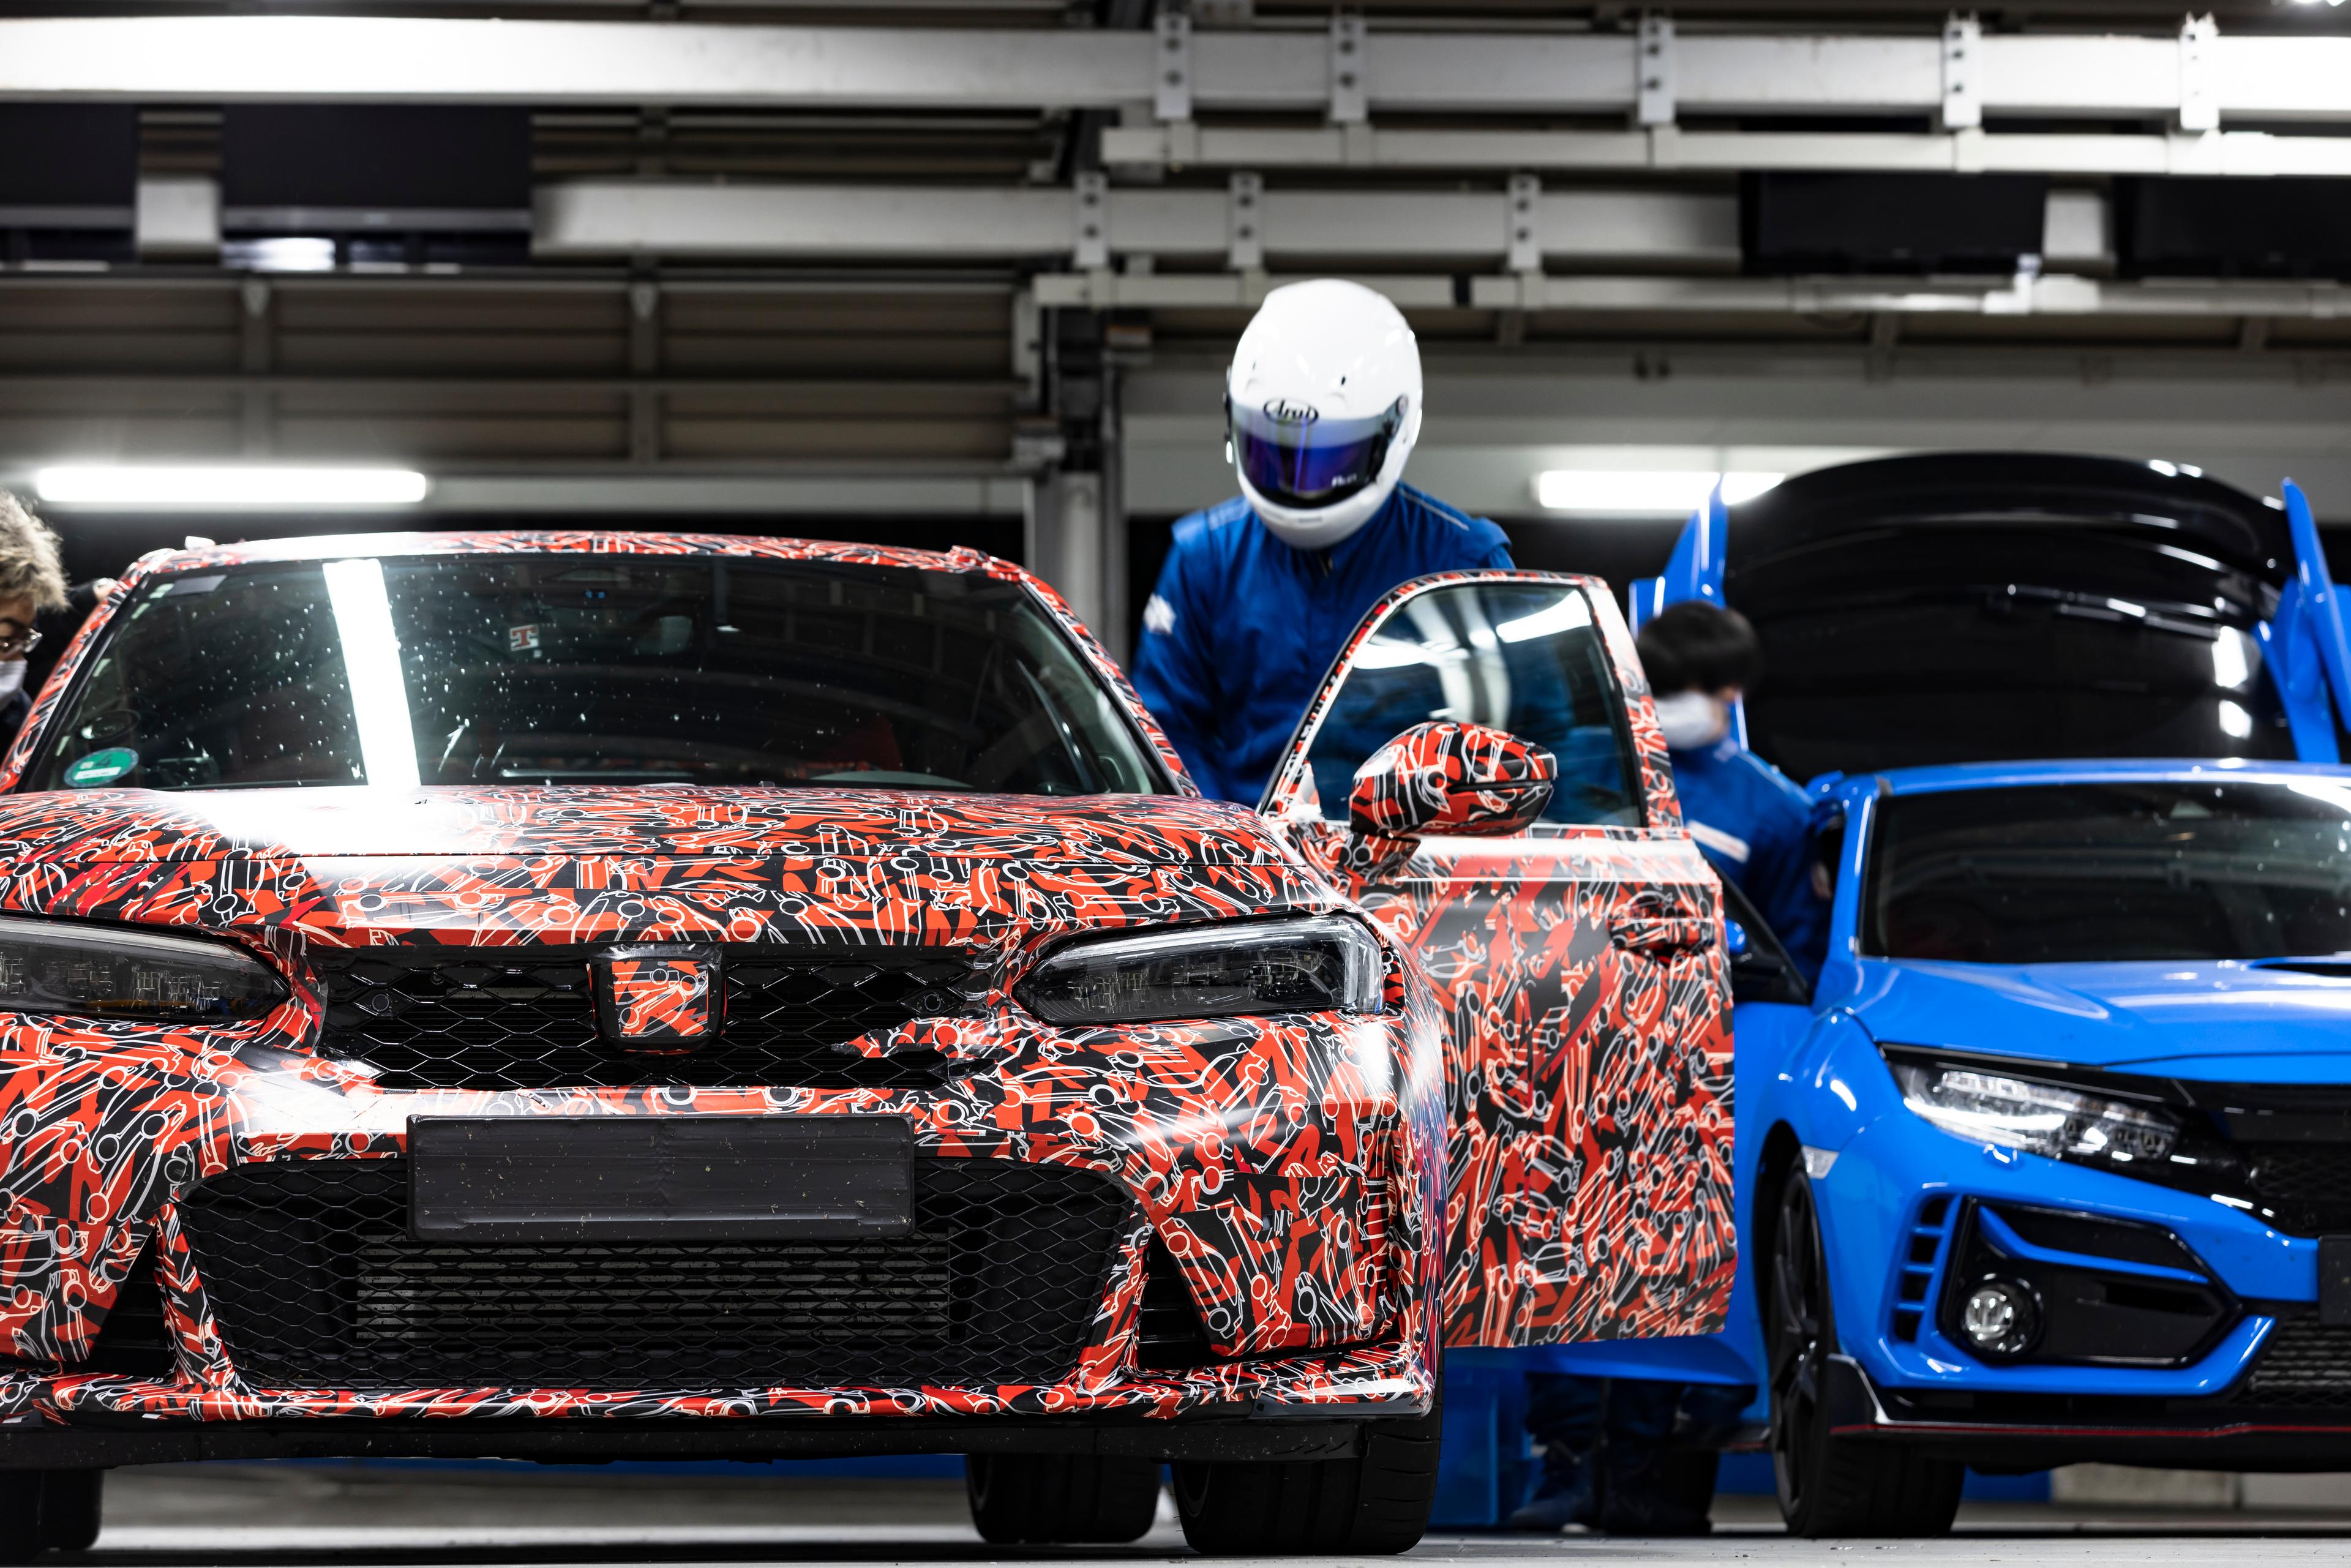 Image of the colorful and uniquely painted Civic Type R from Tokyo Salon with a race car driver stepping into the driver's seat wearing a white helmet and blue suit.